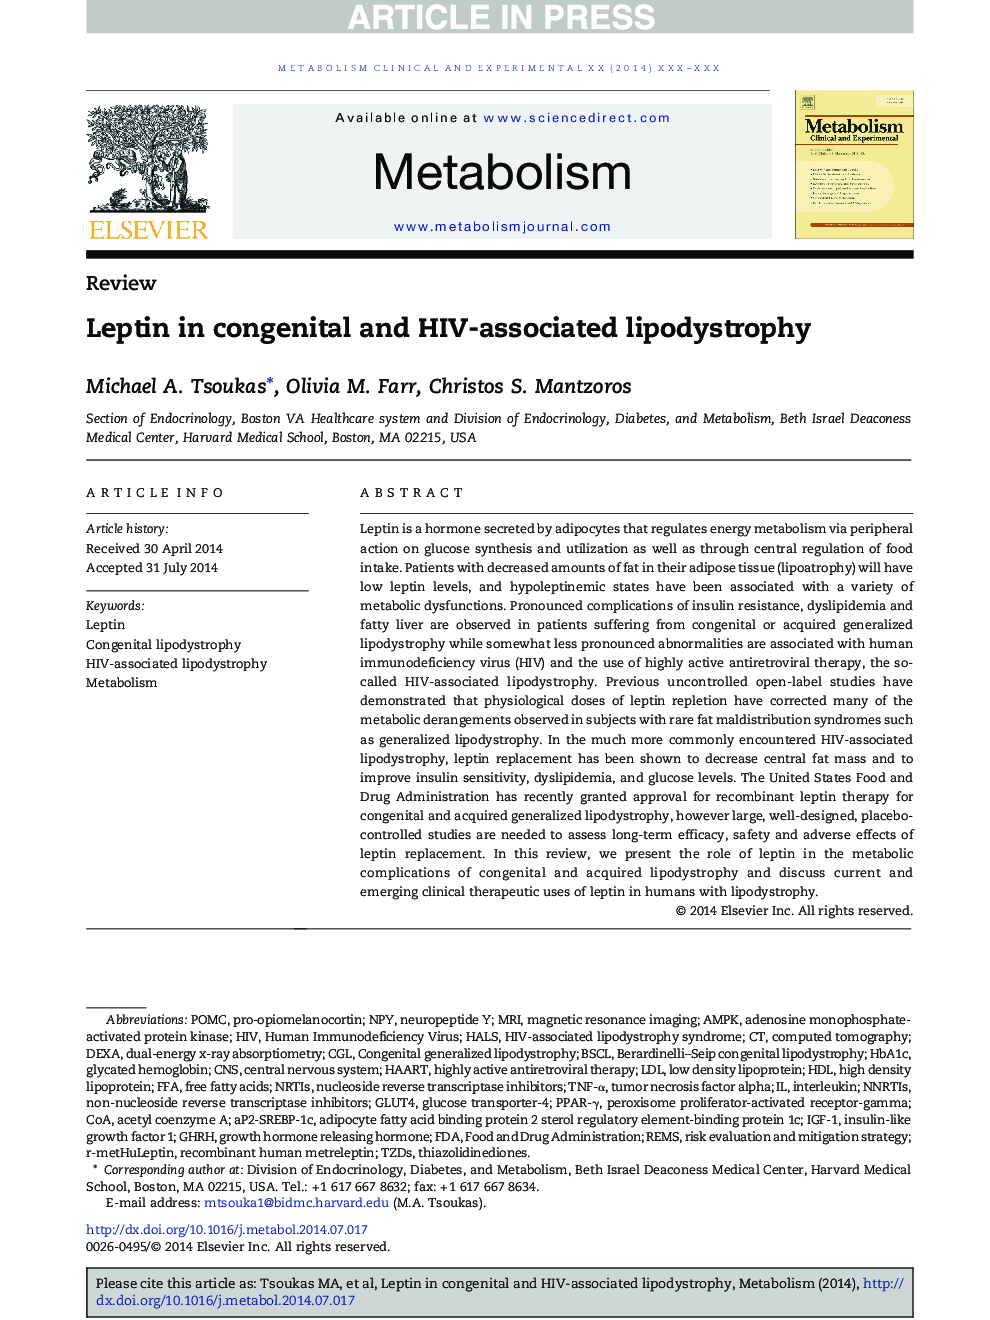 Leptin in congenital and HIV-associated lipodystrophy